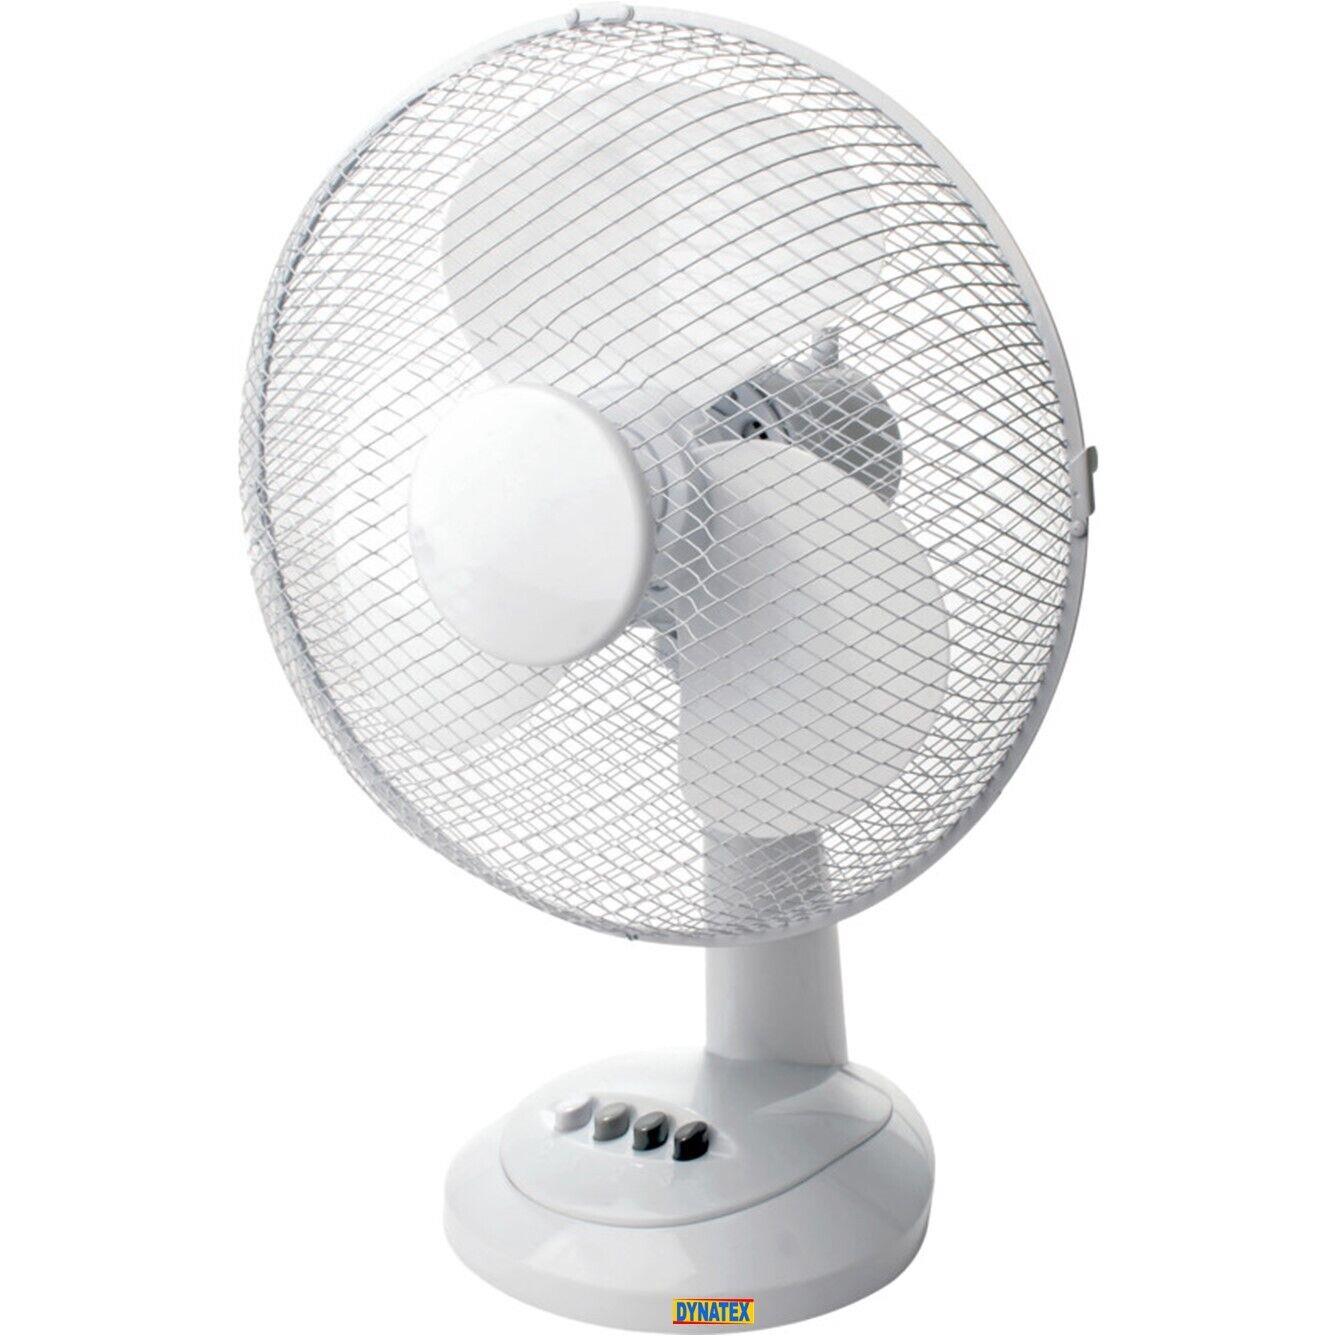 Oscillating White,35W Desktop/Bedside Fan Ideal for Home and Office Quiet Operation 3 Speed Famgizmo Portable Desk Fan 16 Inch 